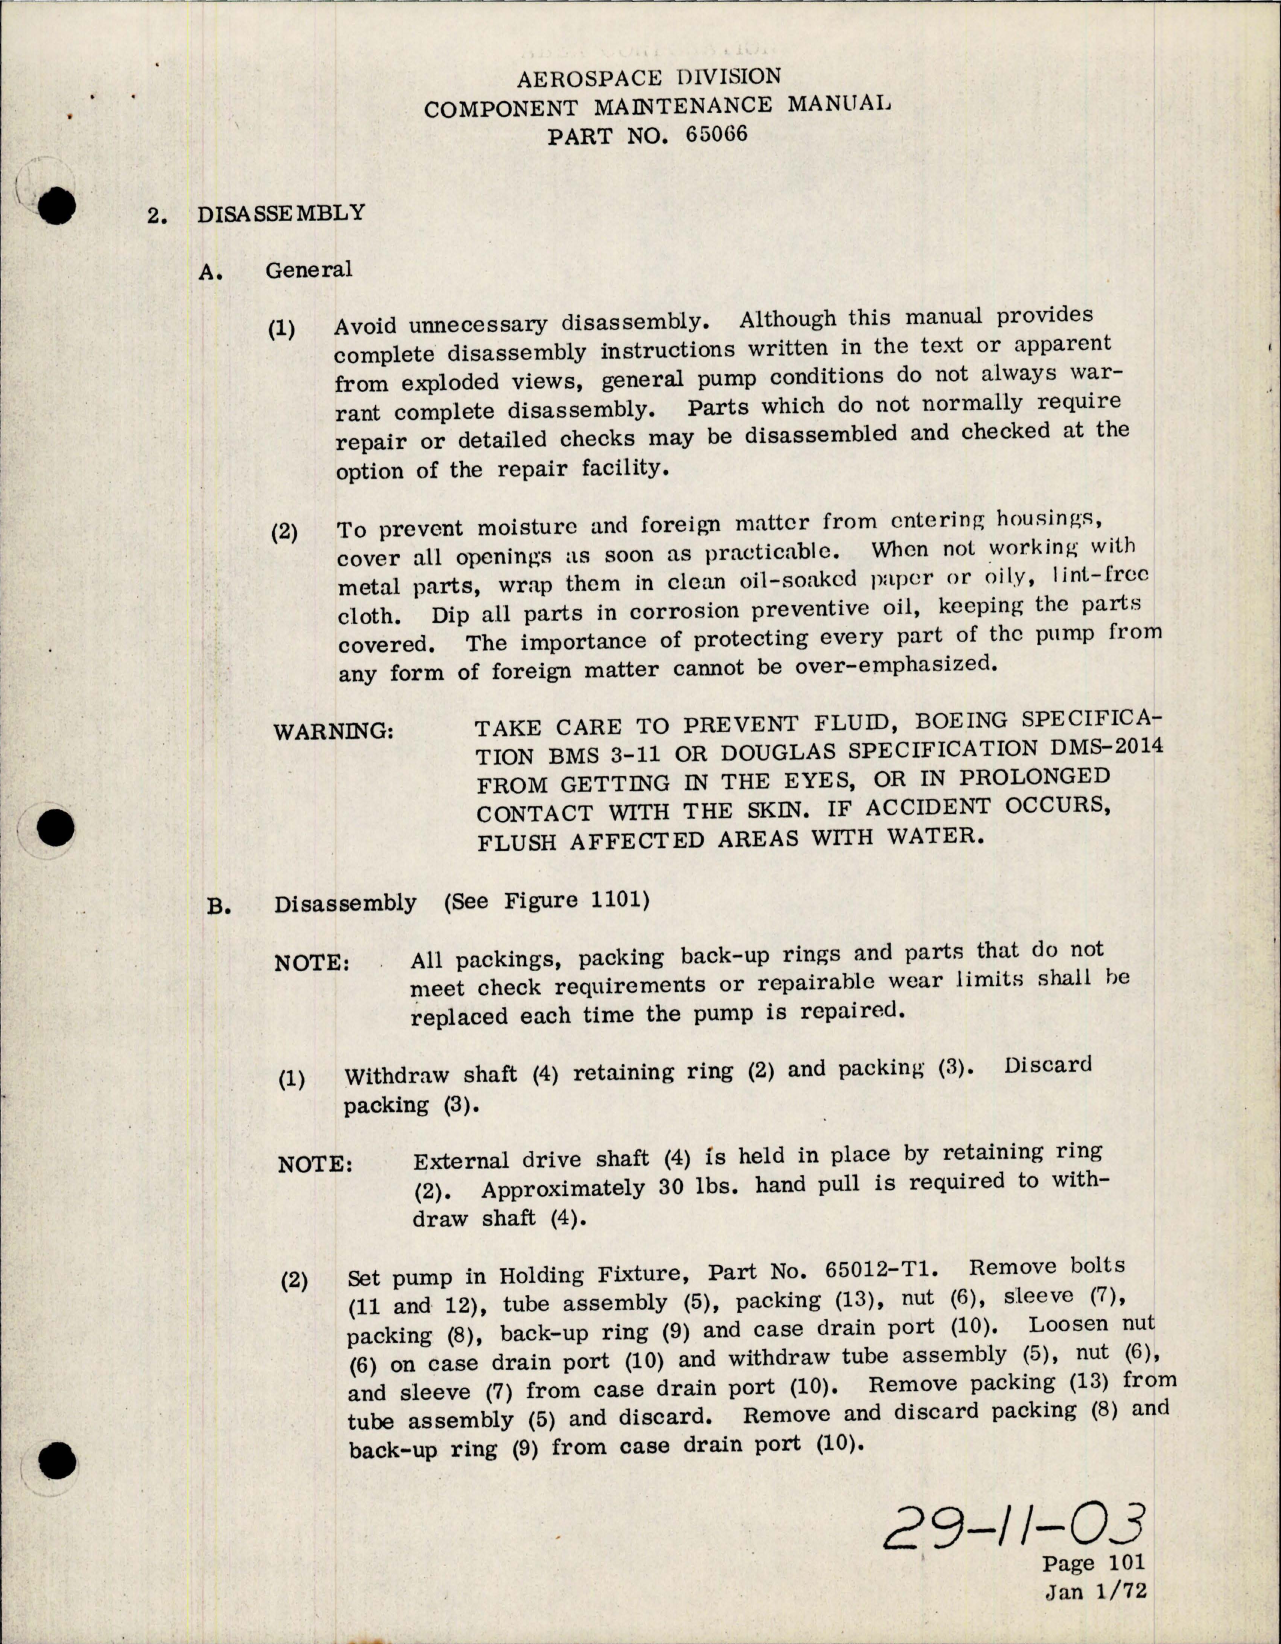 Sample page 9 from AirCorps Library document: Component Maintenance Manual for Hydraulic Pump - Part 65066 - Model AP15V-14 